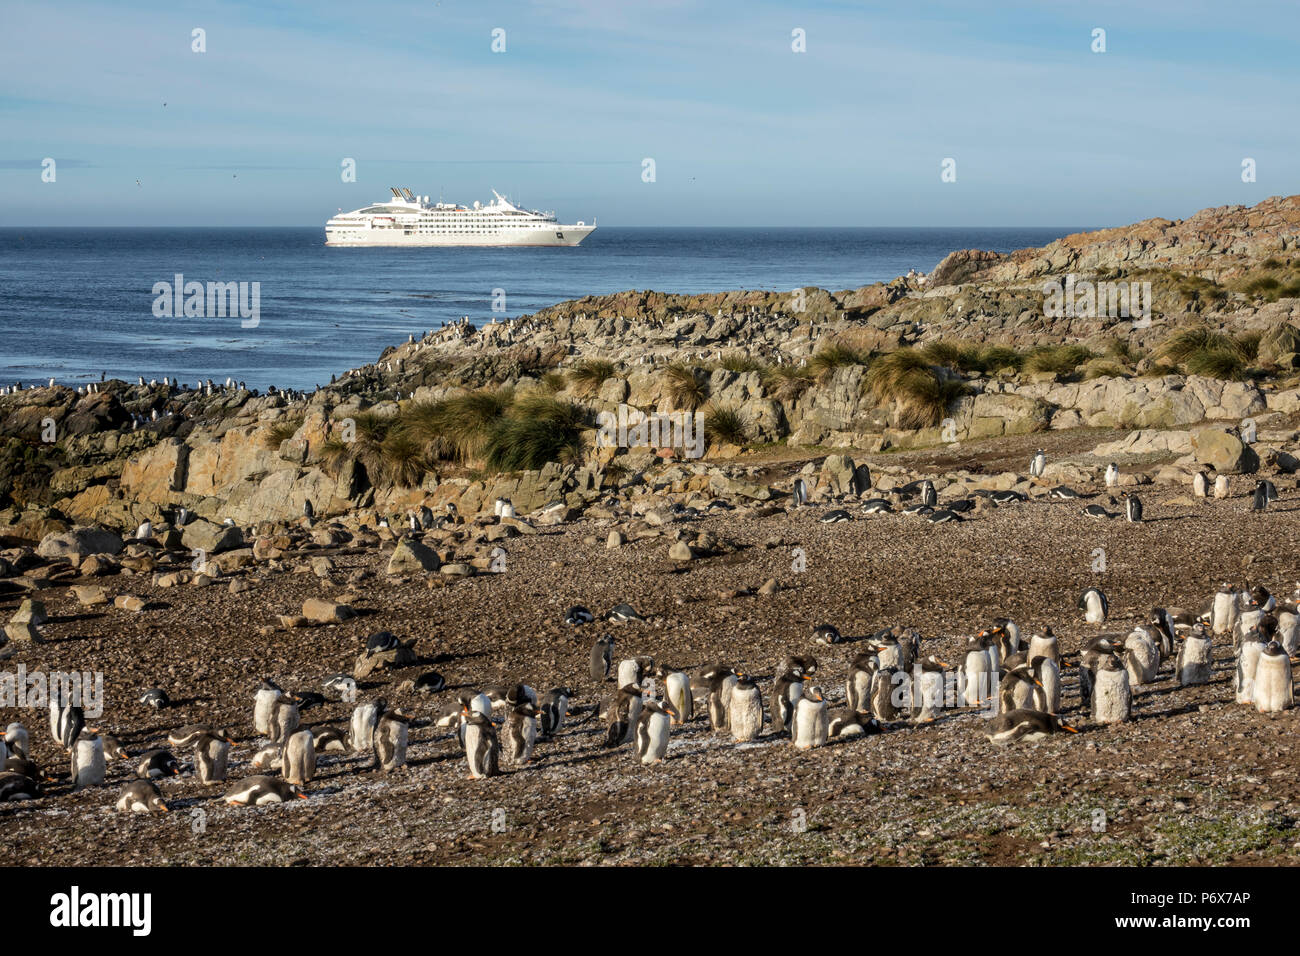 Gentoo penguins at Steeple Jason Island, with Le Lyrial in the background, Falkland Islands Stock Photo